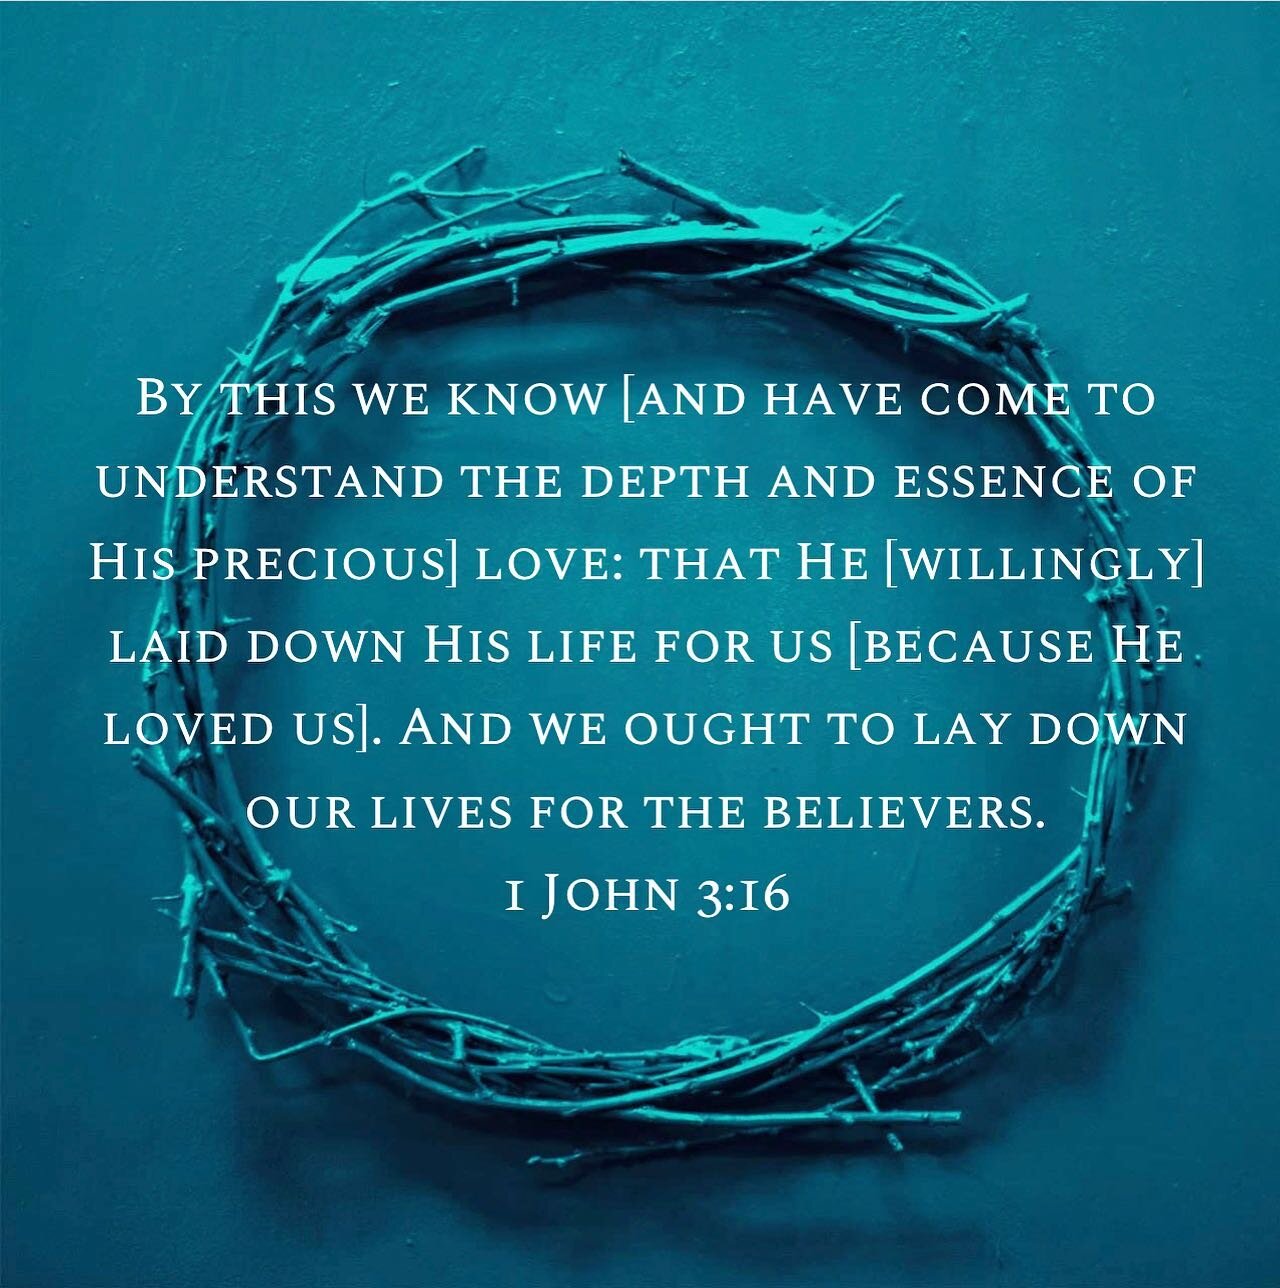 No greater LOVE! Jesus willingly laid His life down for everyone of us! Even for those He knew would betray, deny and reject Him. Thank you Lord for your AMAZING GRACE, thank you for the power of forgiveness and redemption fulfilled at the cross. We 